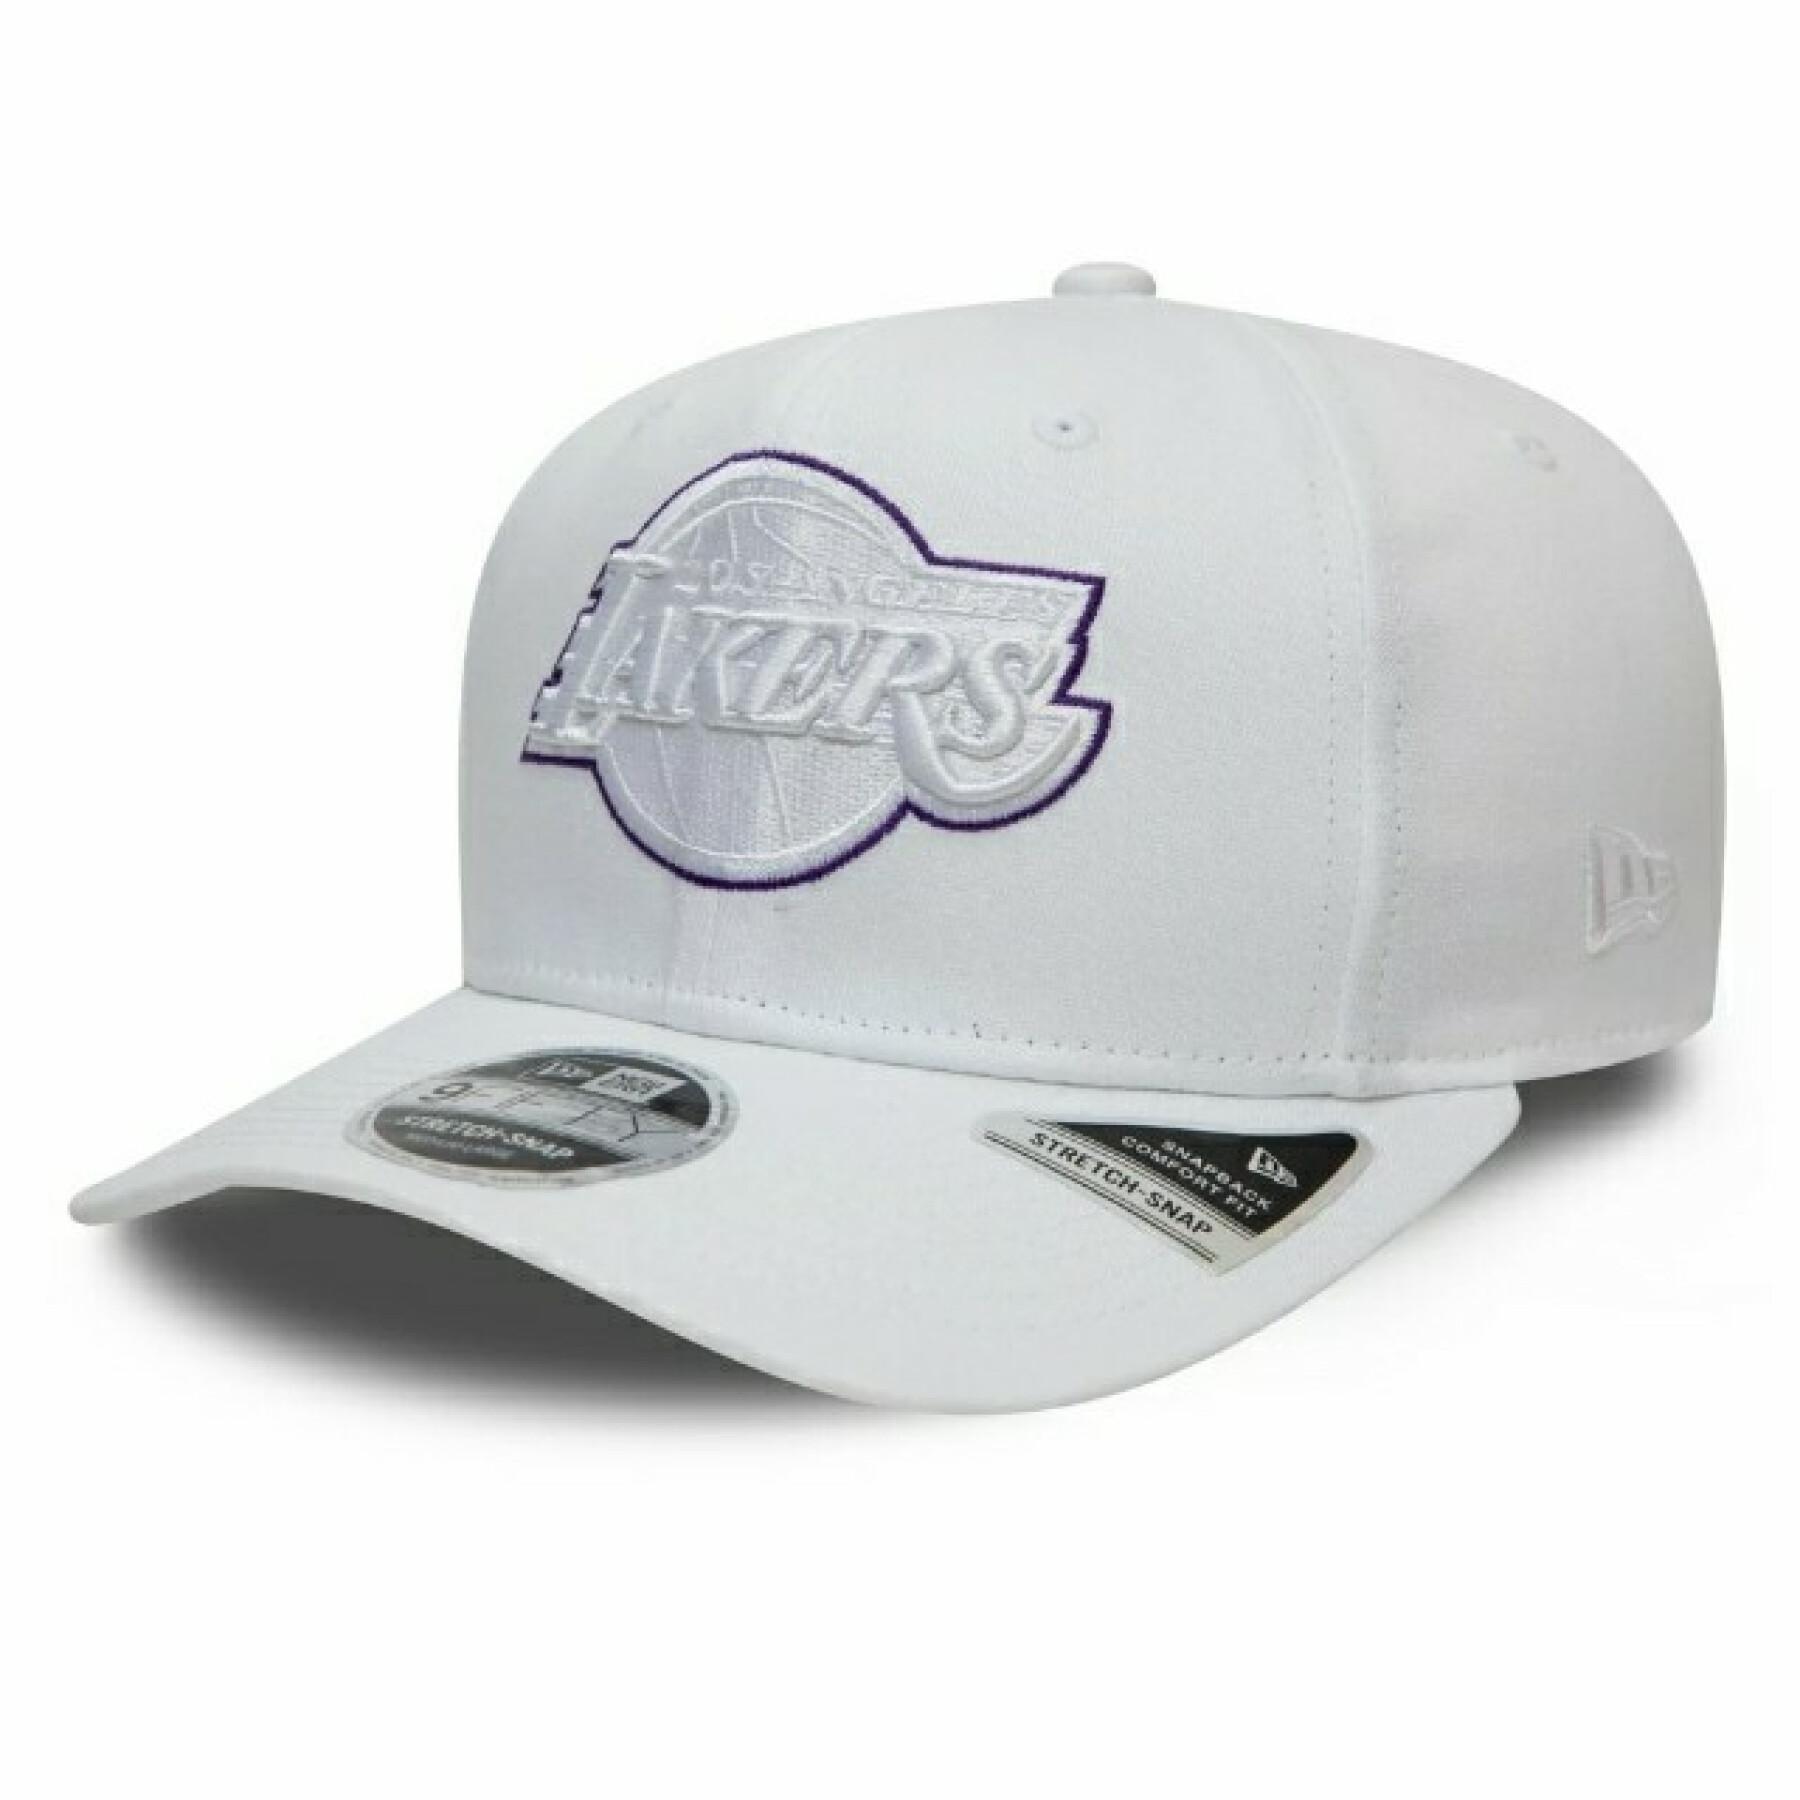 Gorra 9fifty Los Angeles Lakers 2021/22